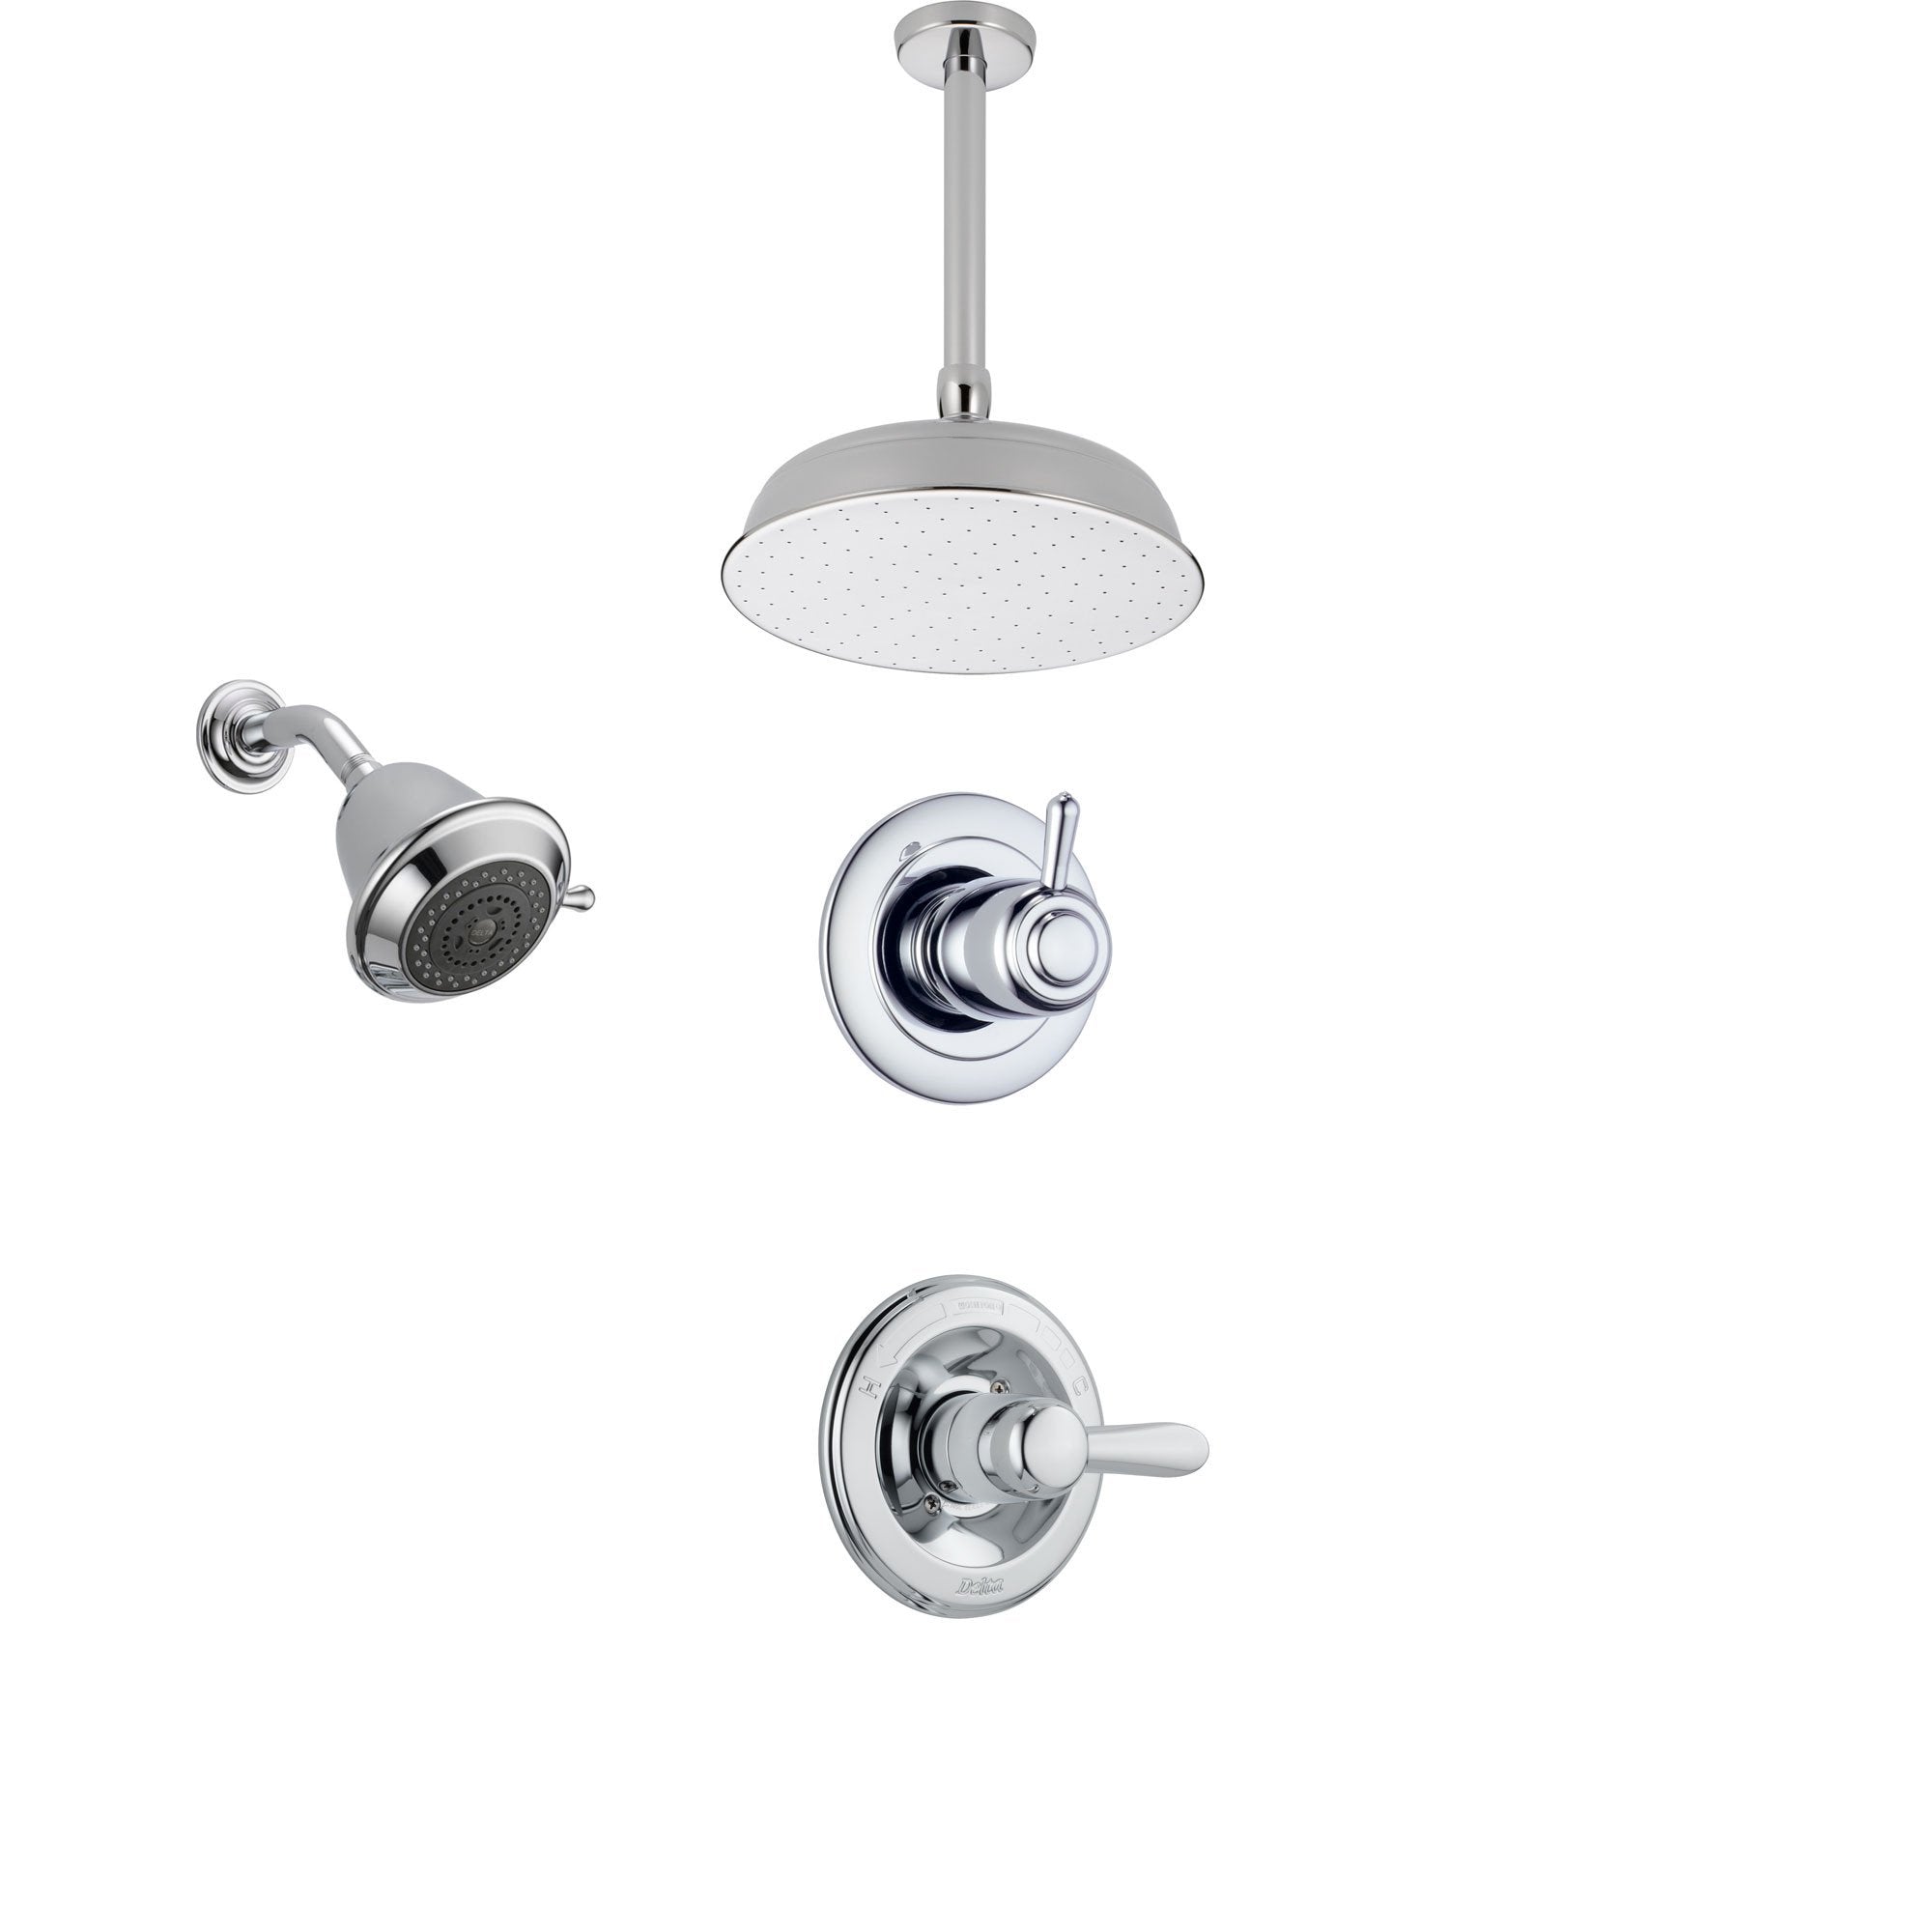 Delta Lahara Chrome Shower System with Normal Shower Handle, 3-setting Diverter, Large Ceiling Mount Rain Showerhead, and Wall Mount Showerhead SS143883